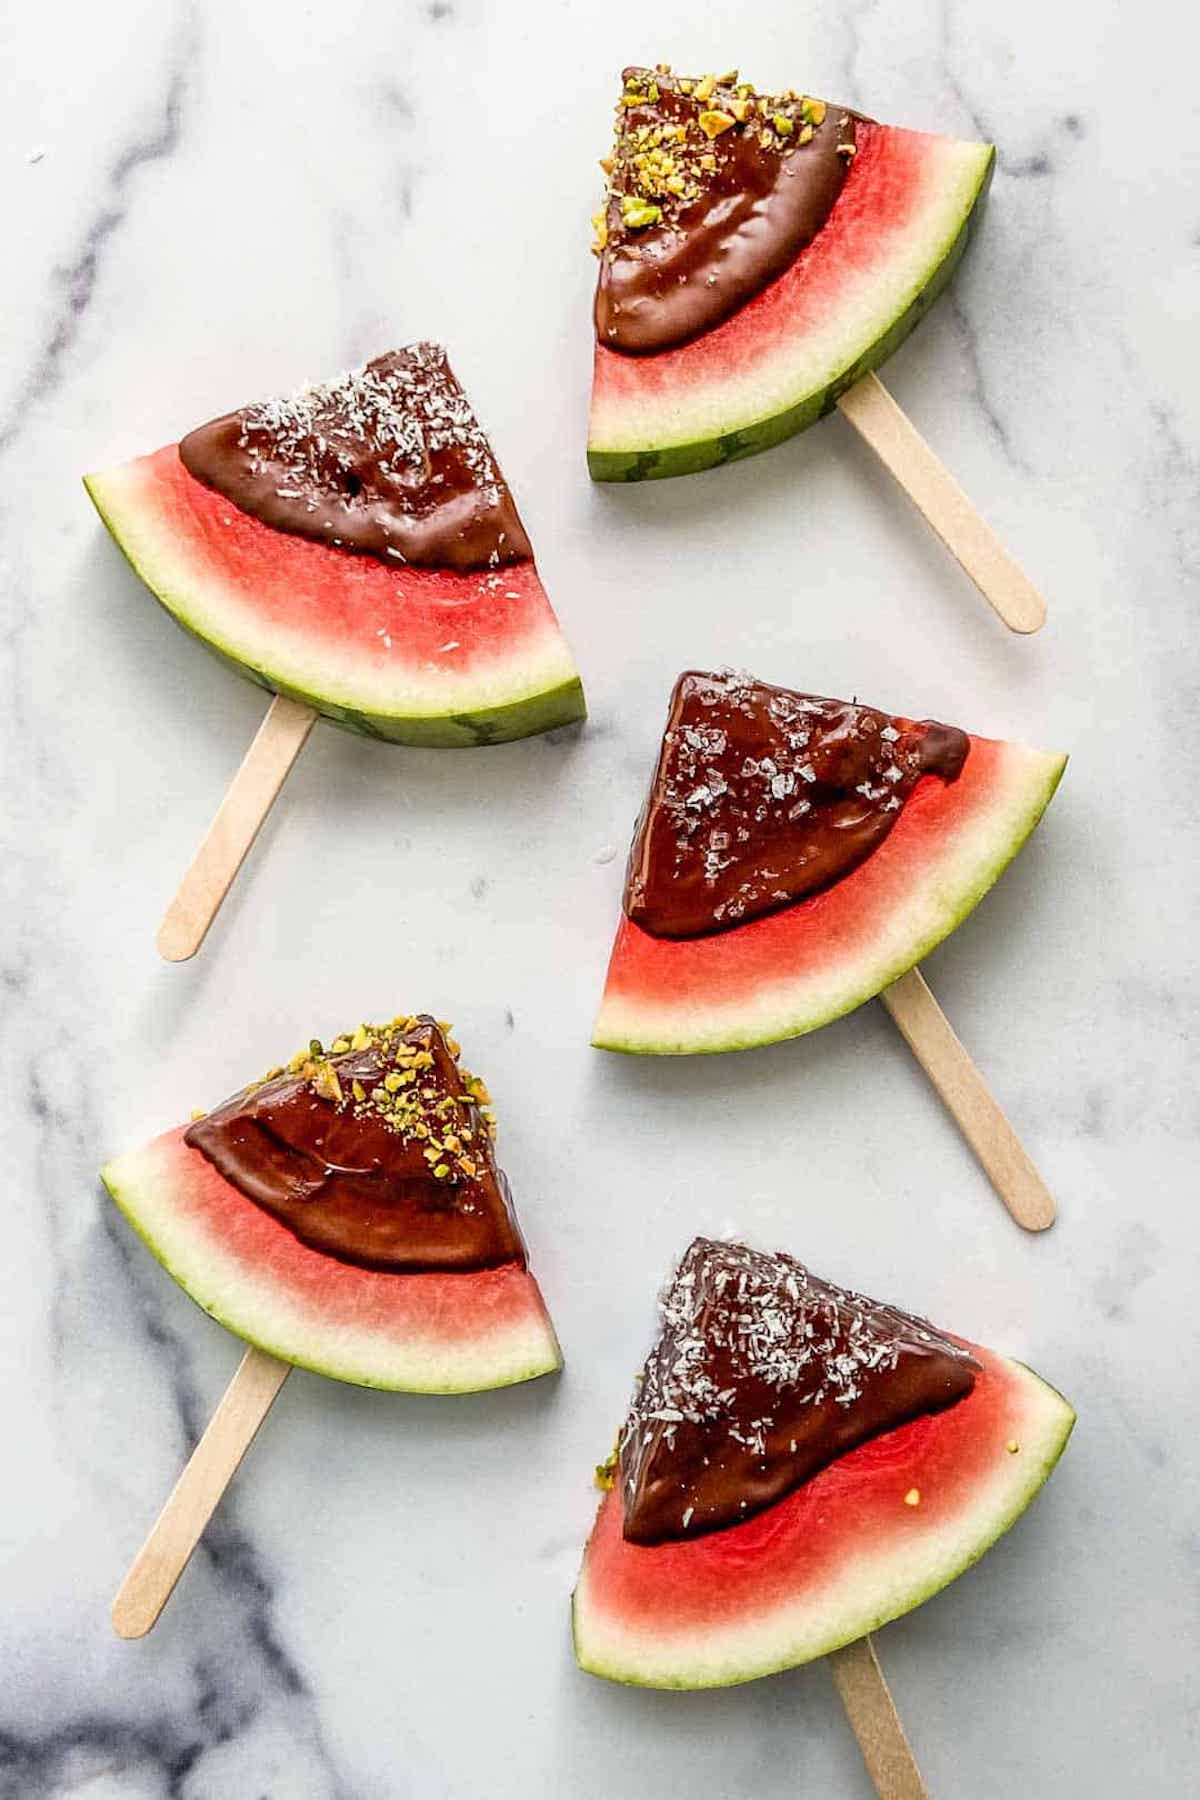 Overhead few of watermelon slices that have been dipped in chocolate and are on popsicle sticks.